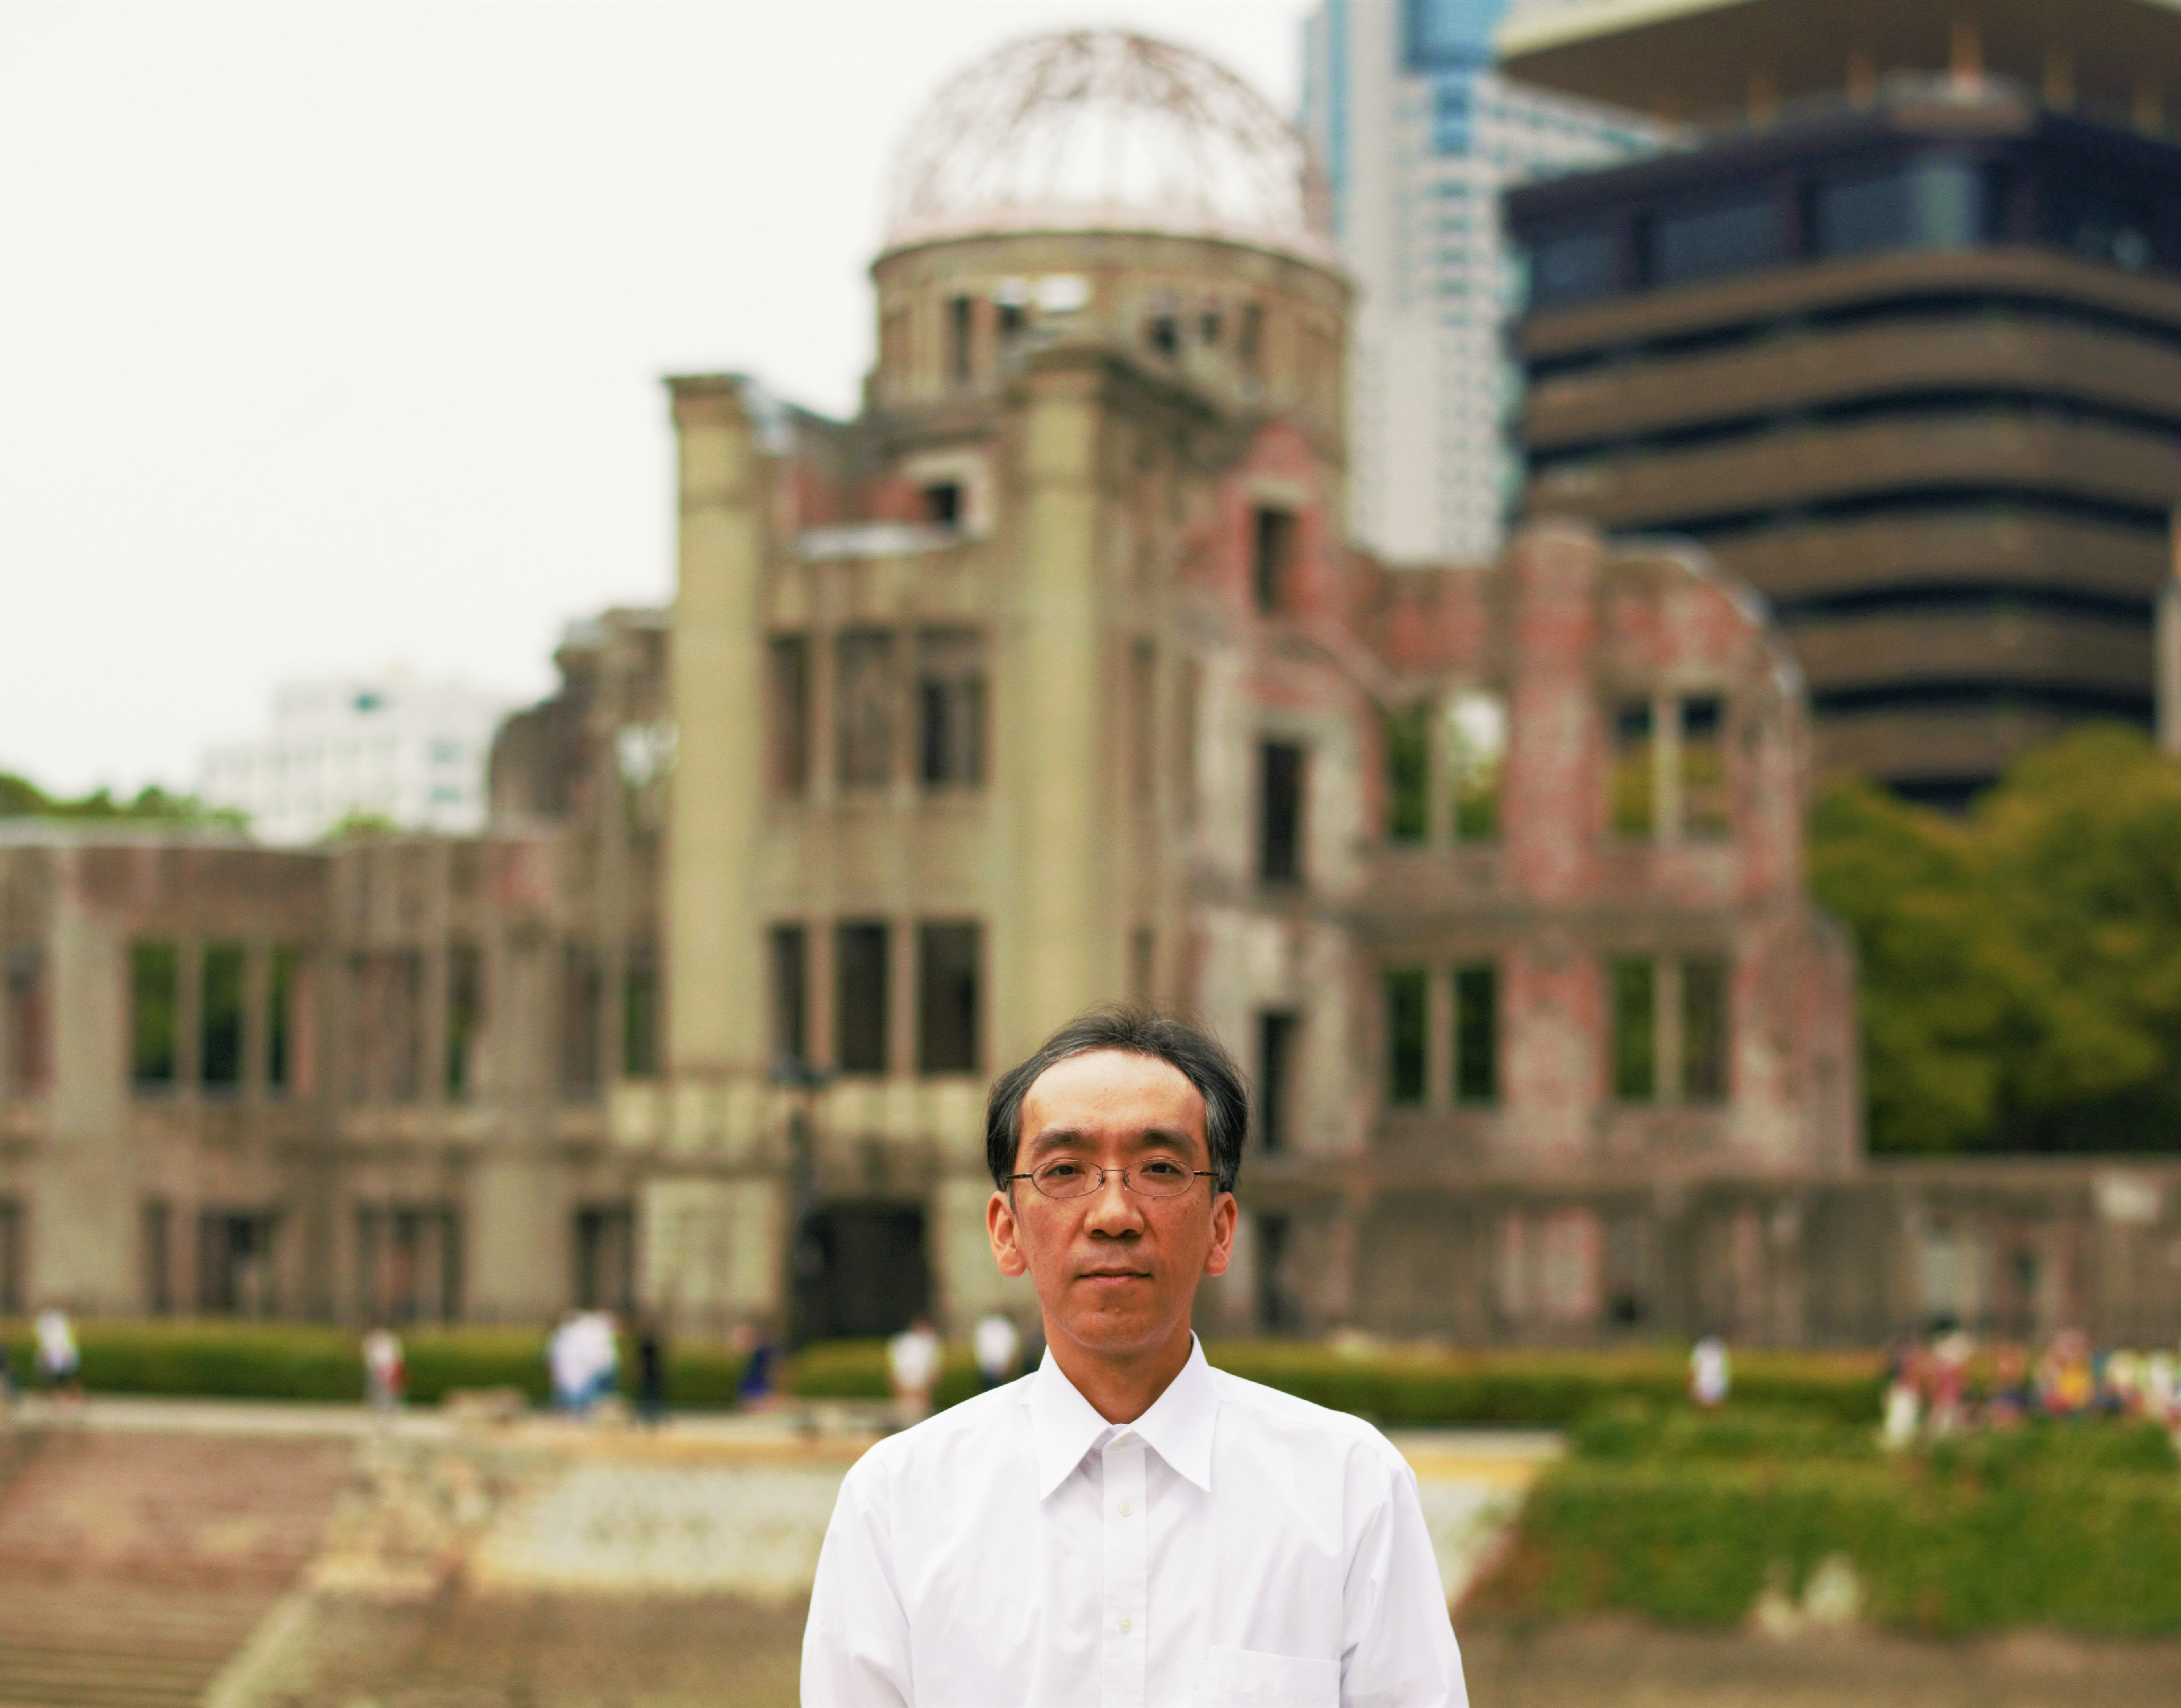 A rebirth: Composer Takashi Niigaki stands in front of the Atomic Bomb Dome in Hiroshima. | NEUES AKKORD